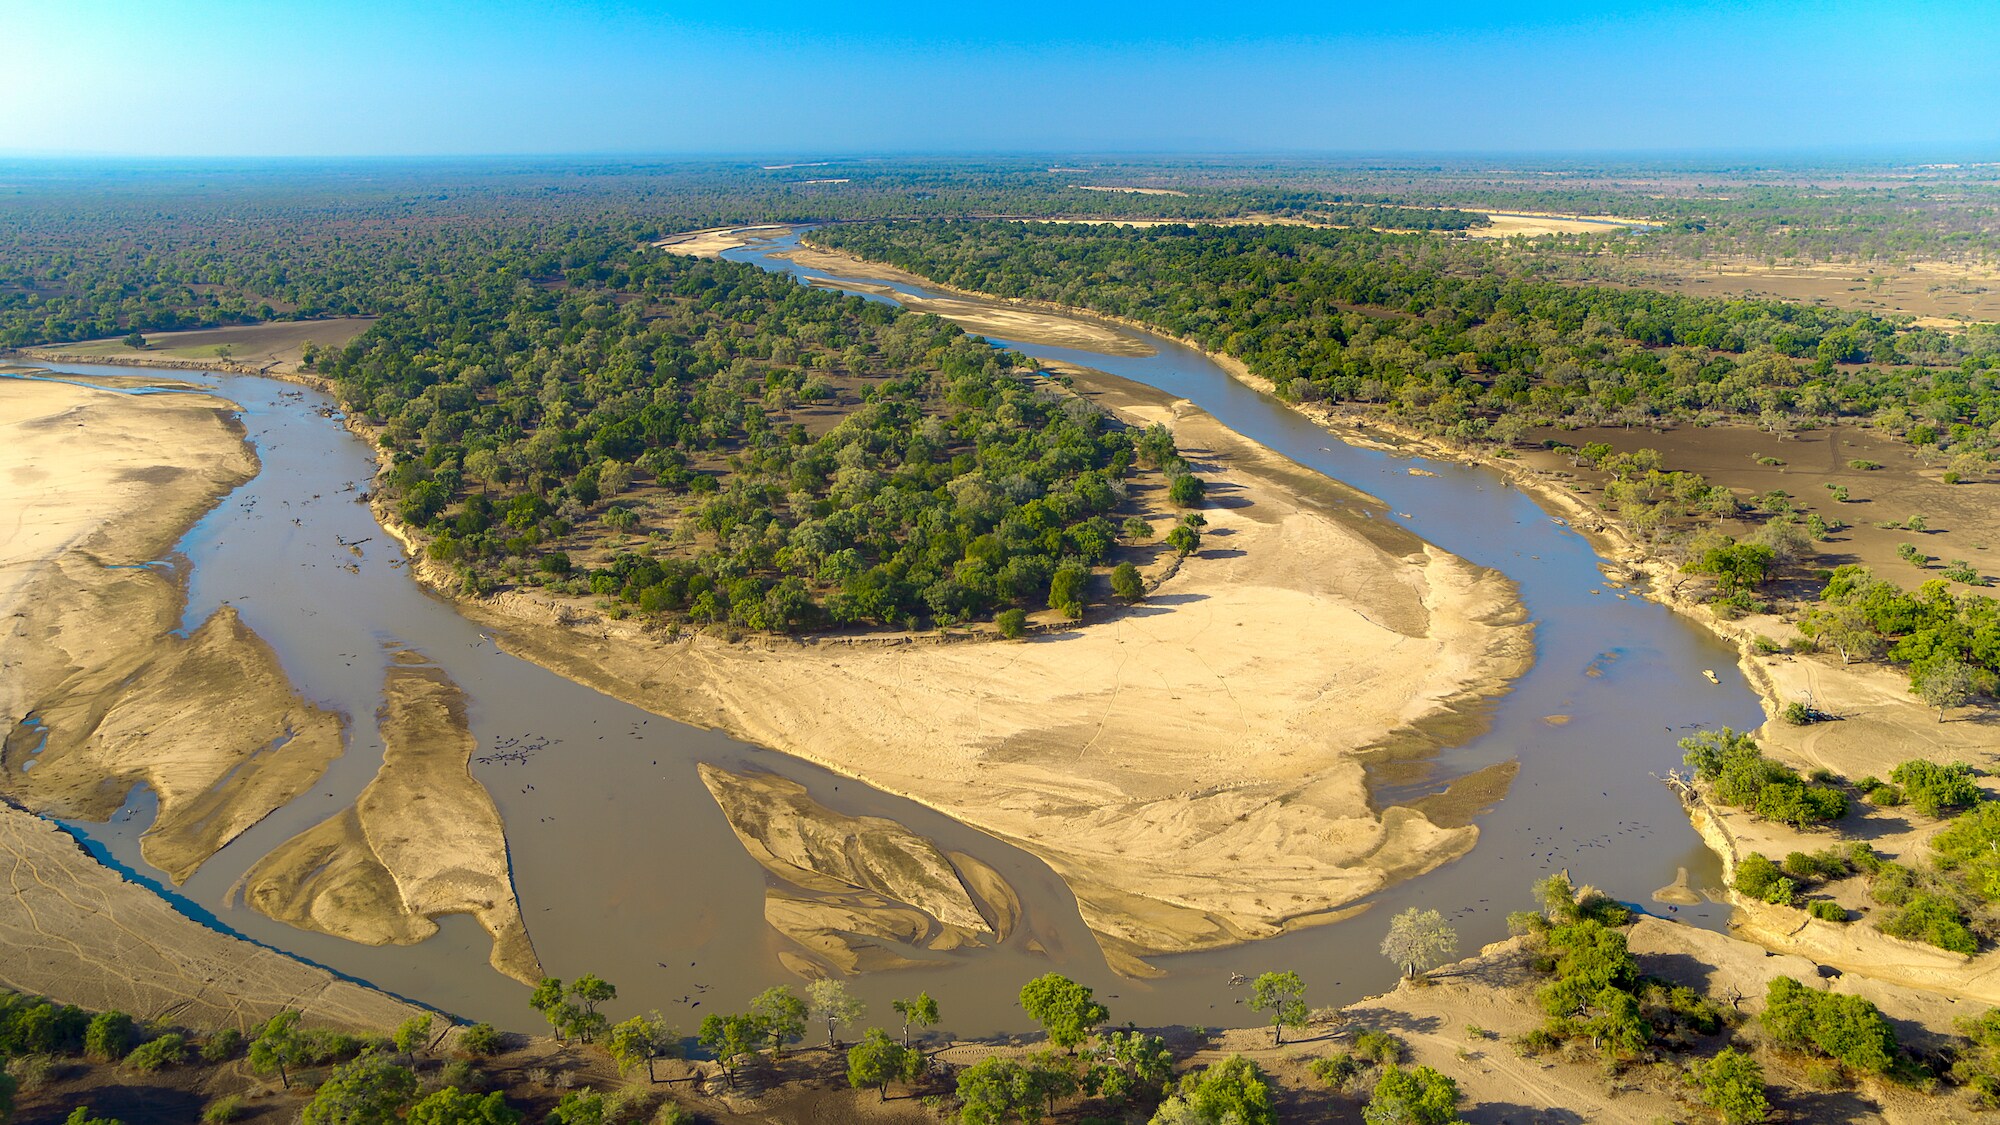 The Luangwa River flowing through the National Park in Zambia. (Credit: National Geographic/Bertie Gregory for Disney+)